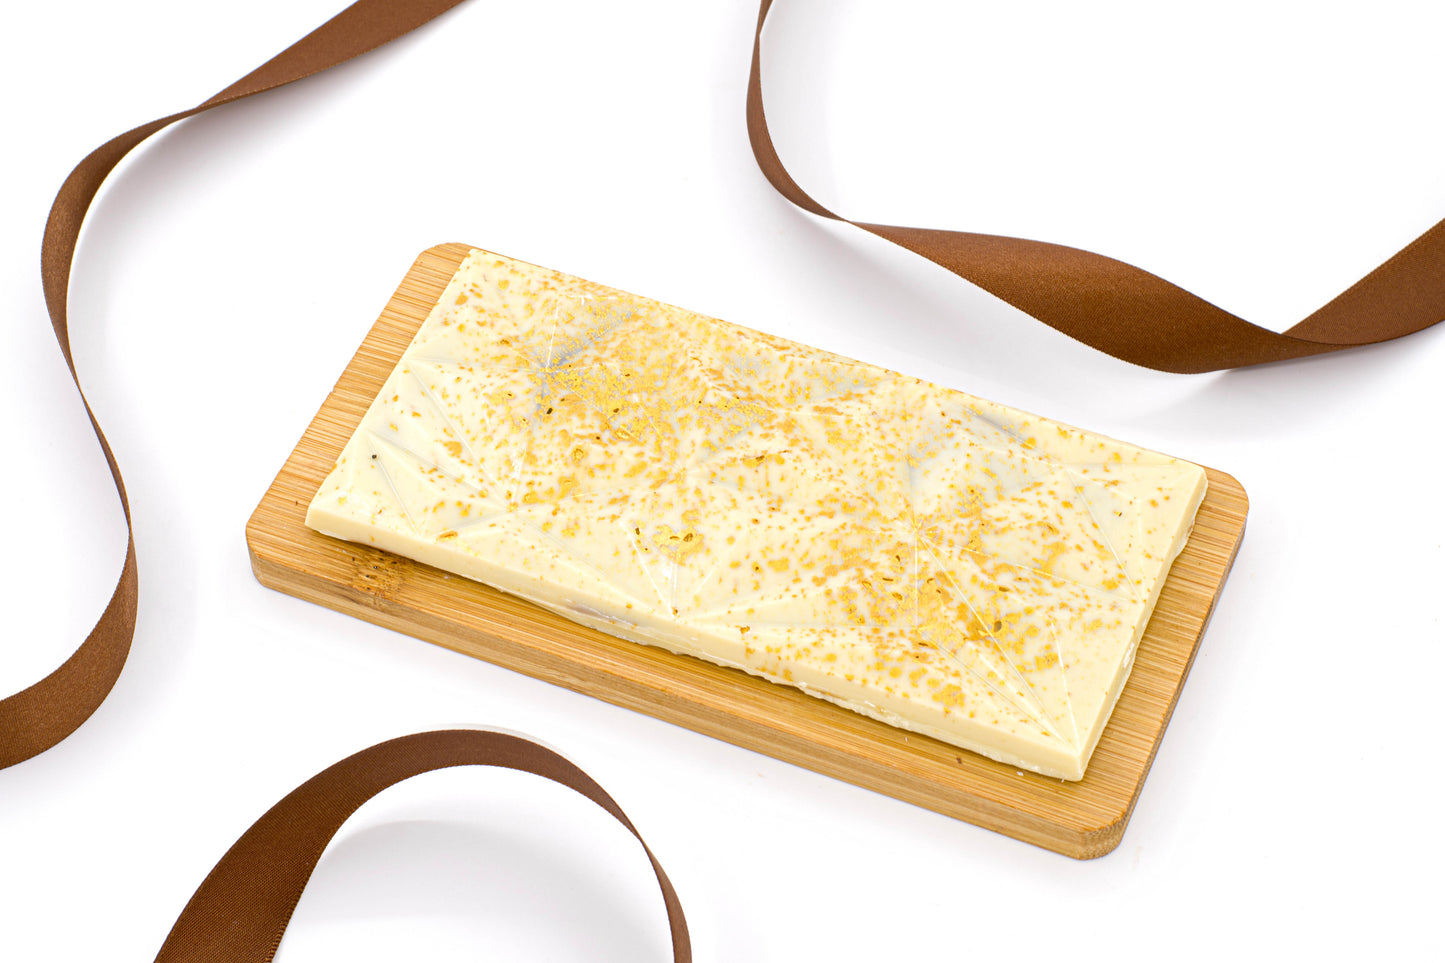 White Chocolate bars with Amoretto